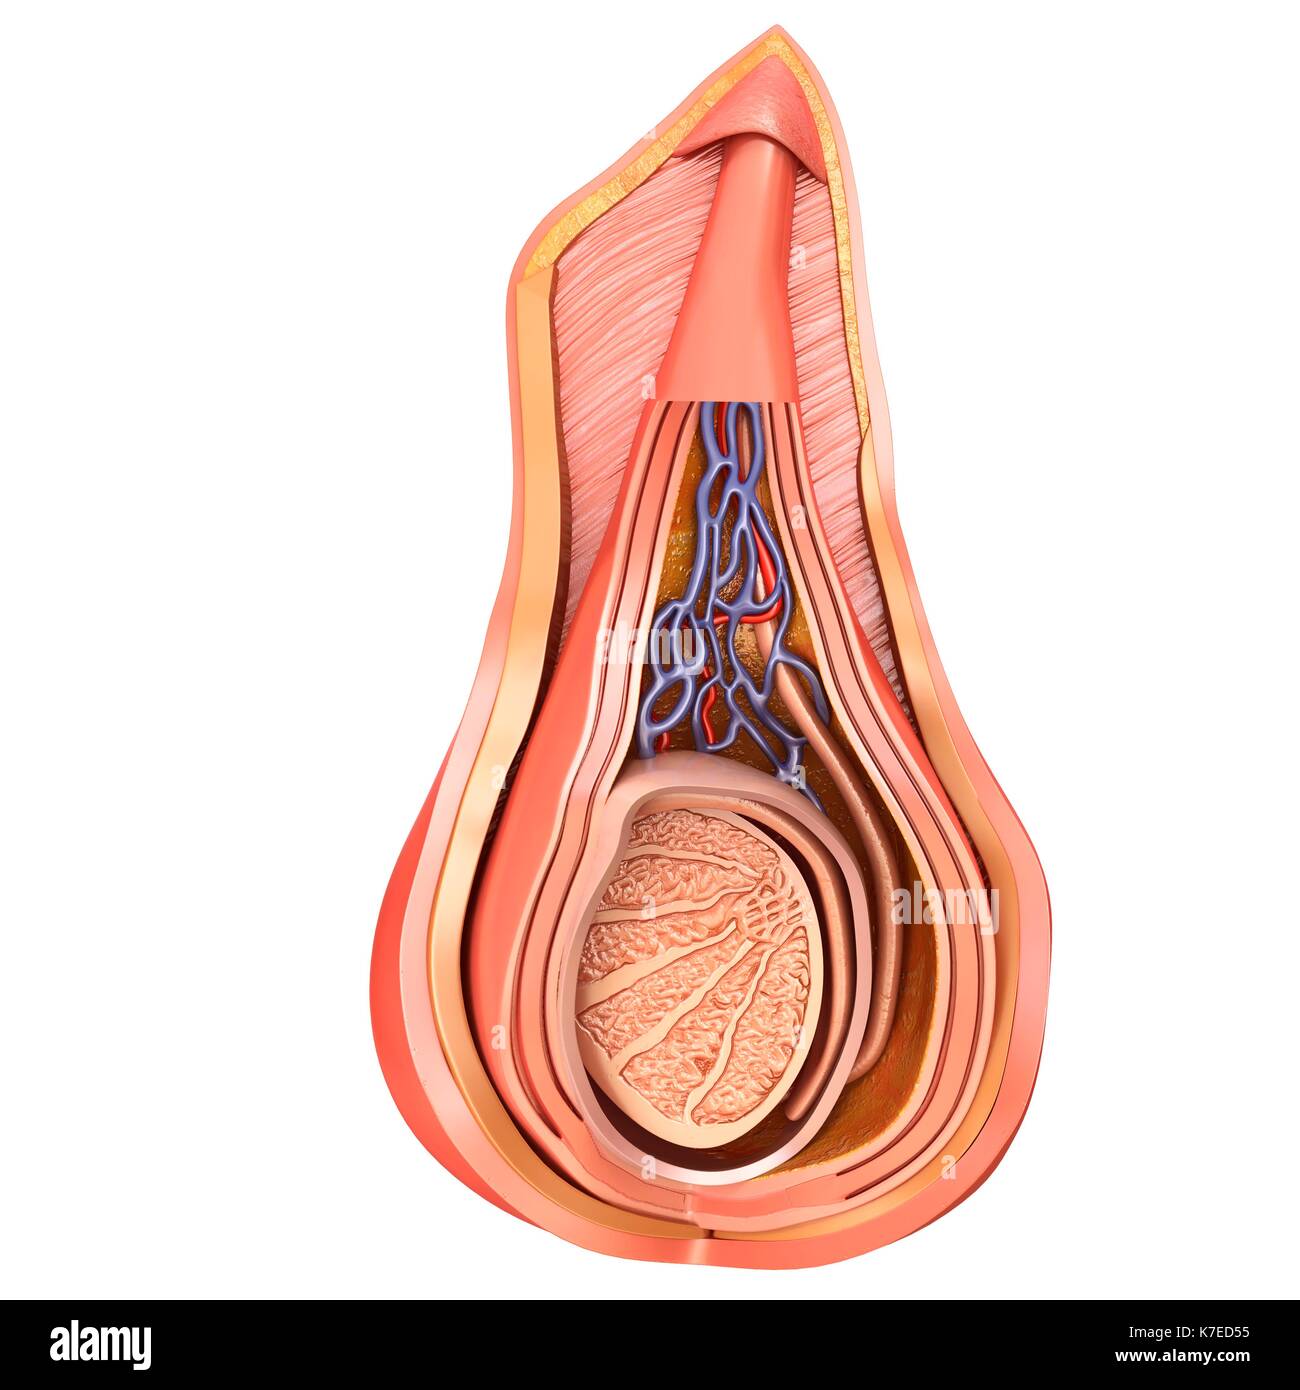 Illustration of scrotal layers of testis. Stock Photo